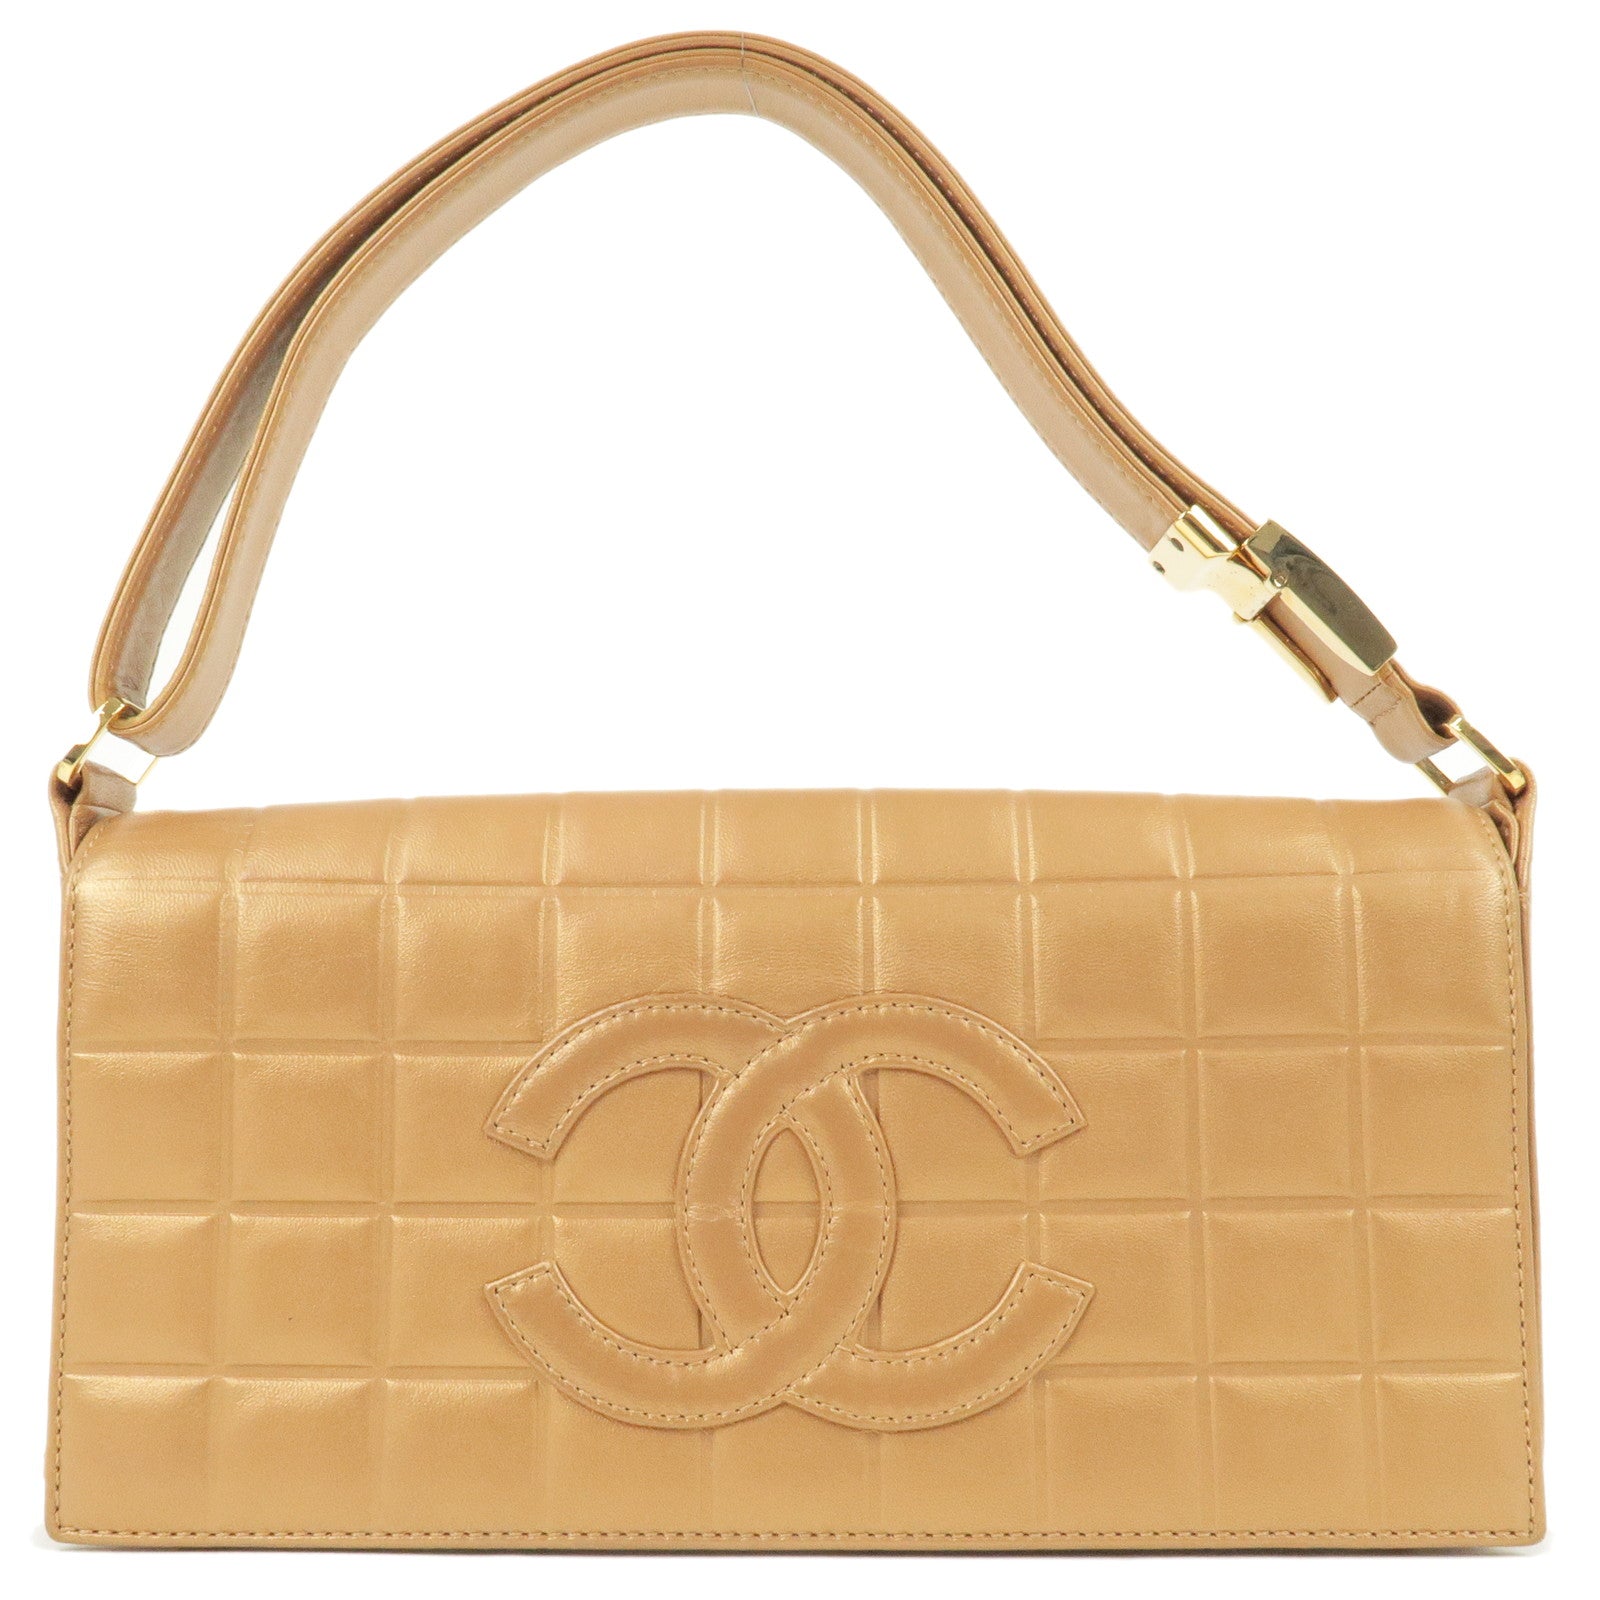 CHANEL Quilted Leather CC Logo Chocolate Bar Flap Bag Black